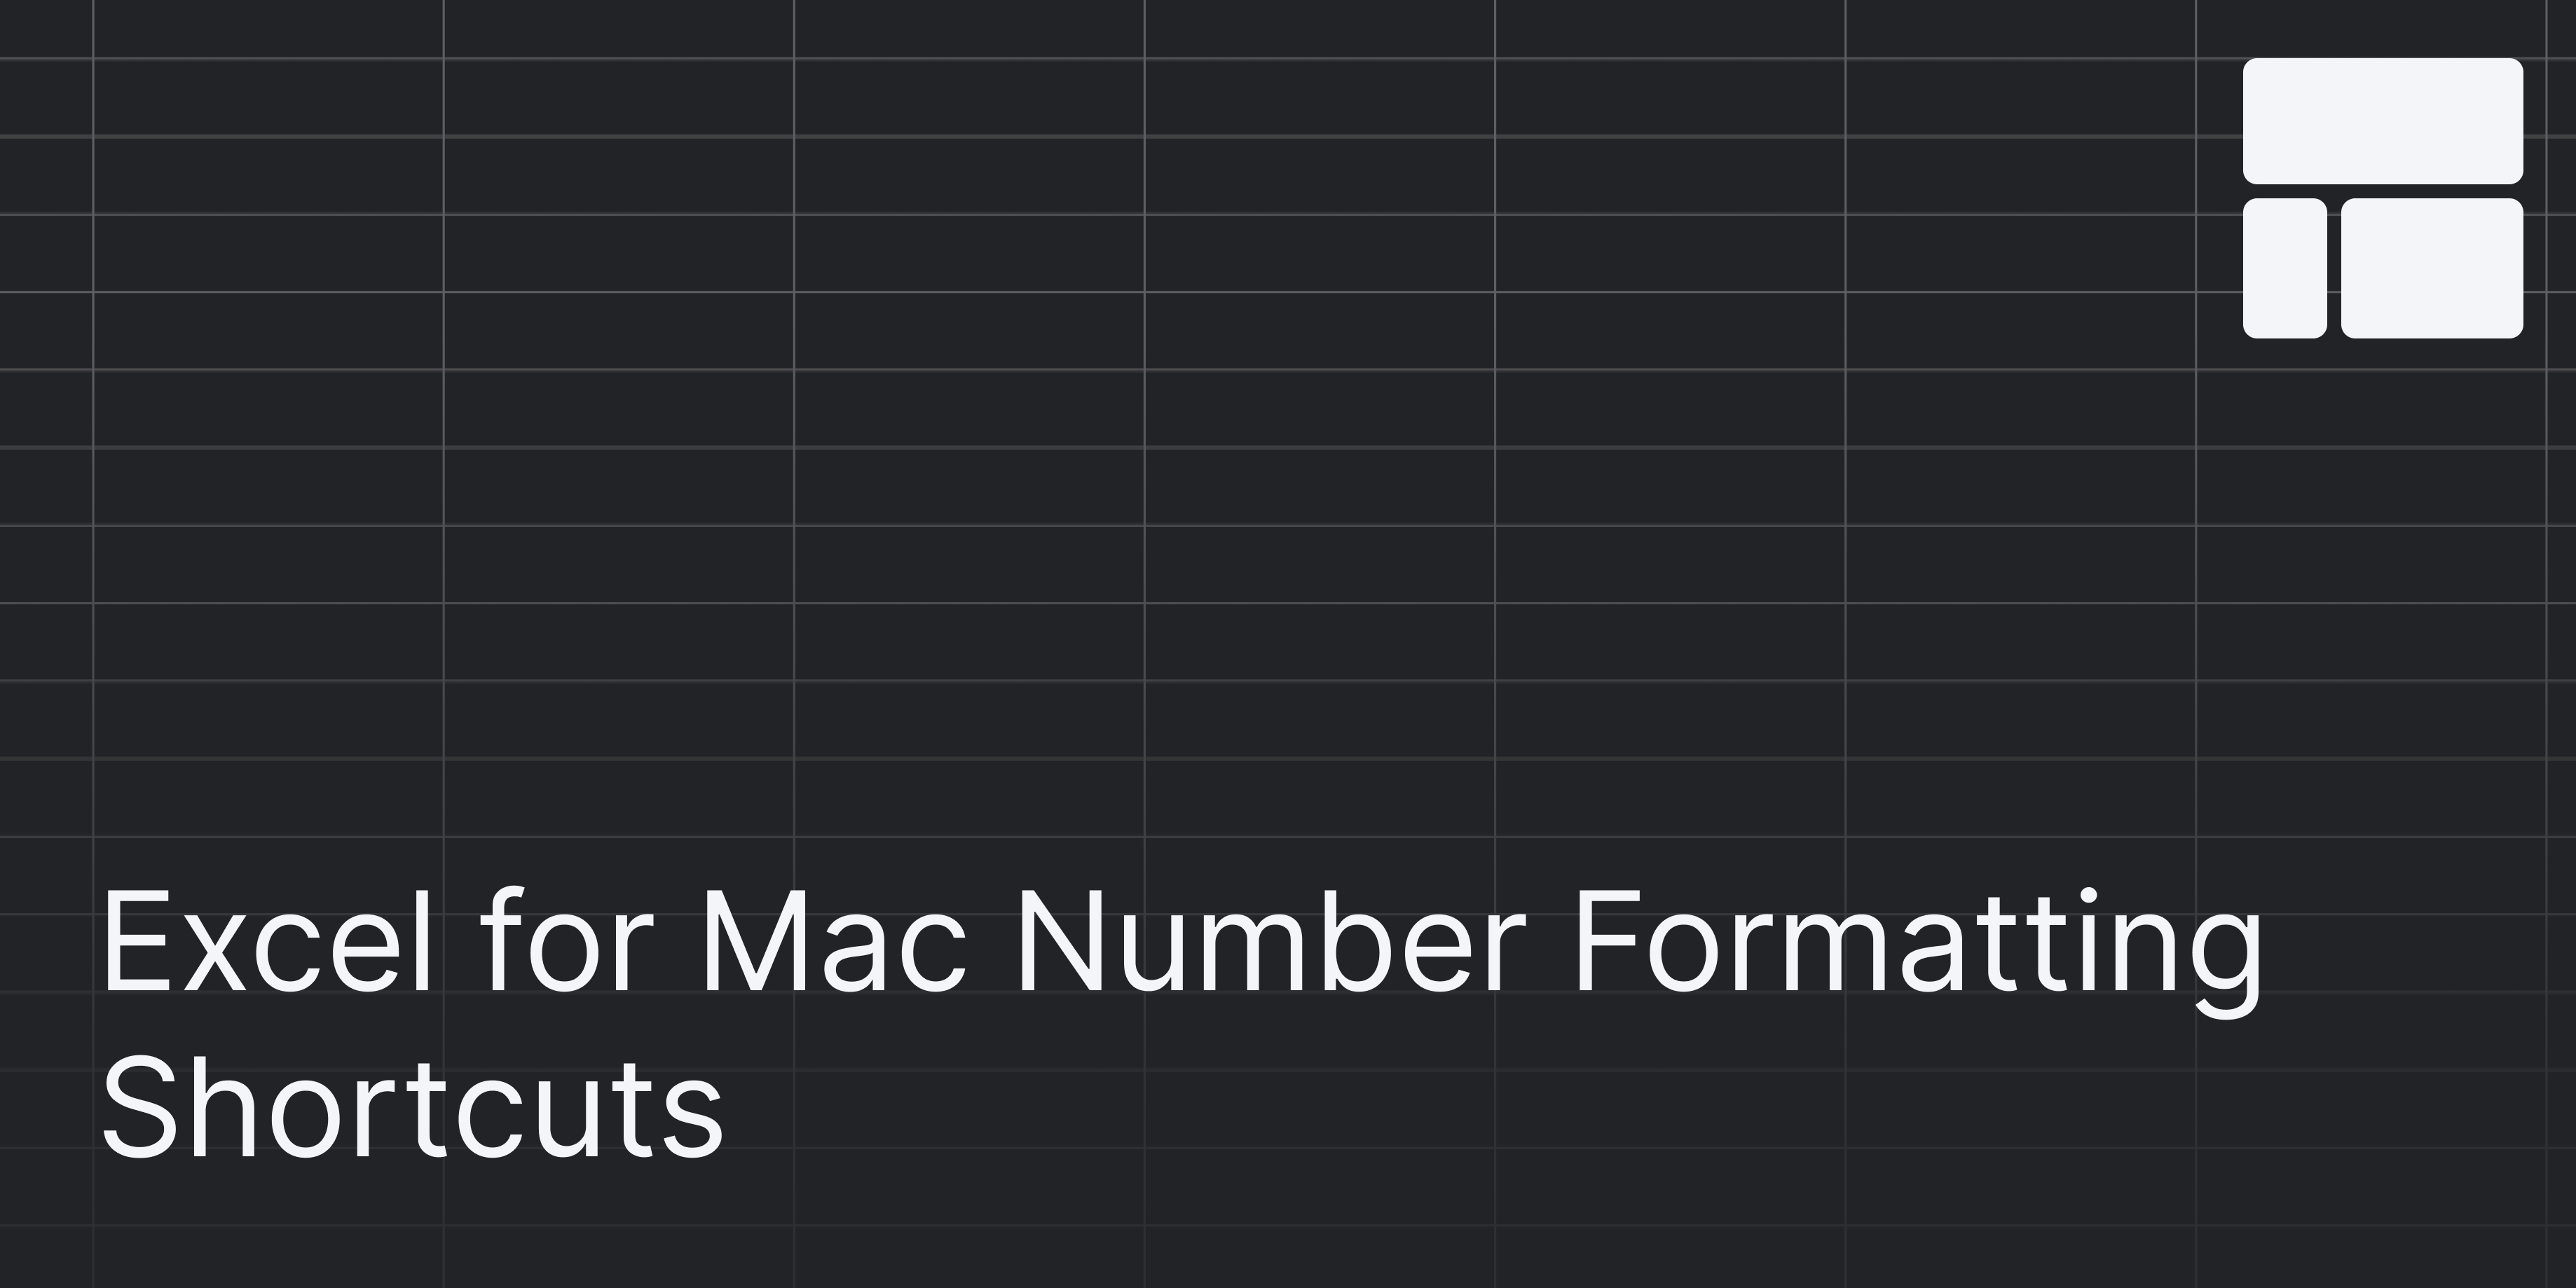 Cover Image for Excel for Mac Number Formatting Shortcuts